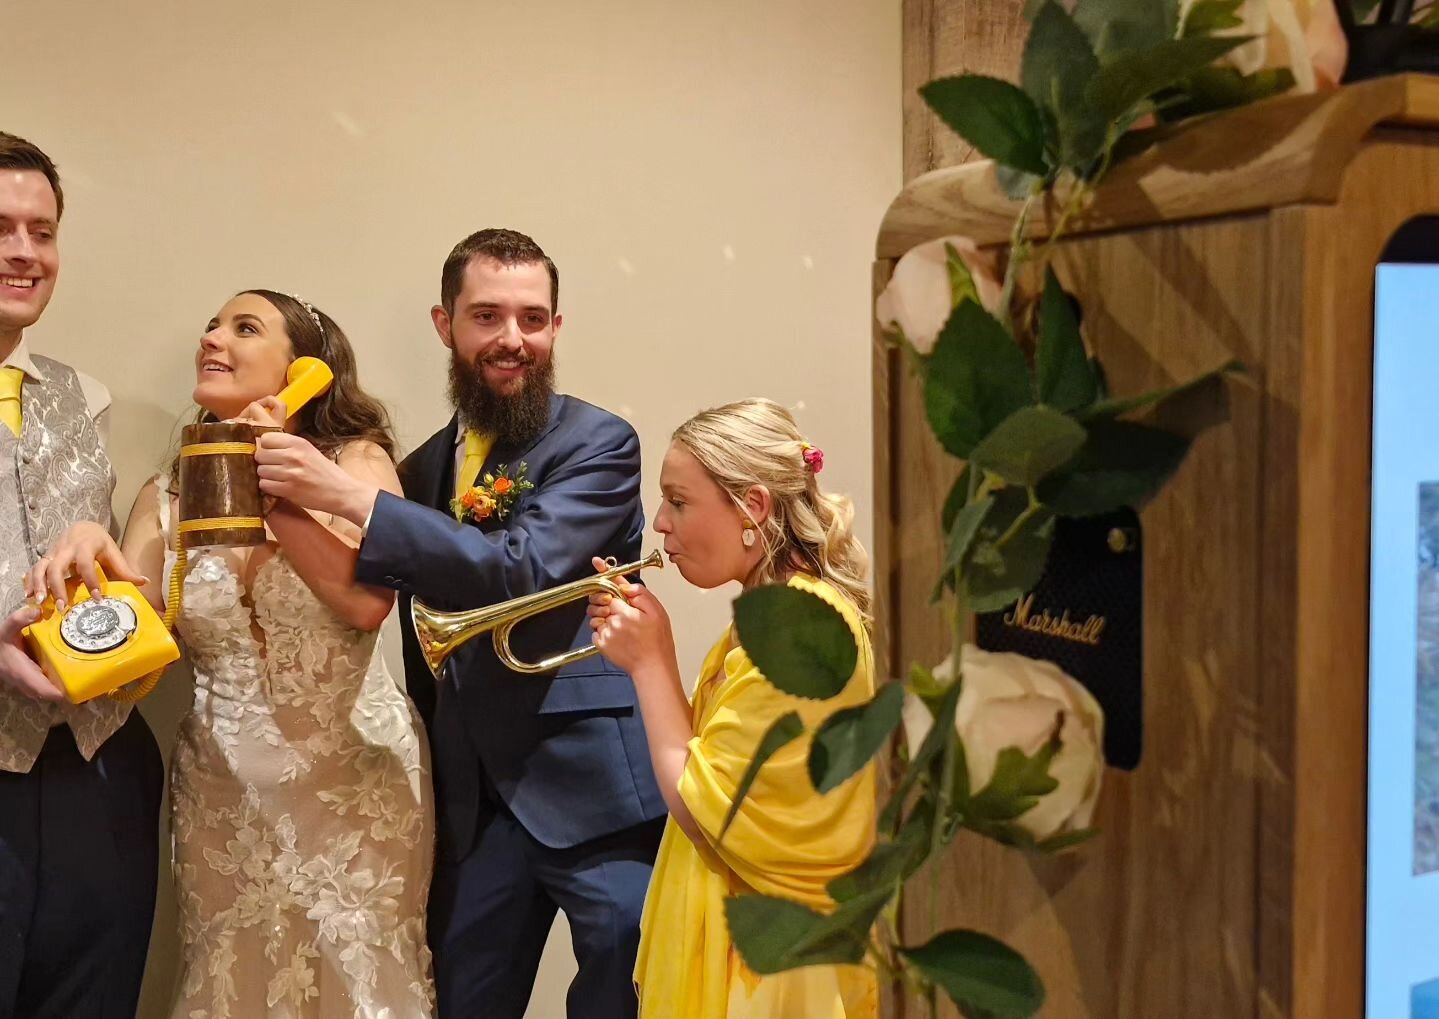 Massive congrats to Laura and Russell Garlic-Reed on tying the knot! It was amazing to be a small part of your big day. Here's to a lifetime of happiness, adventure, and making great memories together. 🍾🎉 #CheersToTheGarlicReeds

#wedding #weddingp